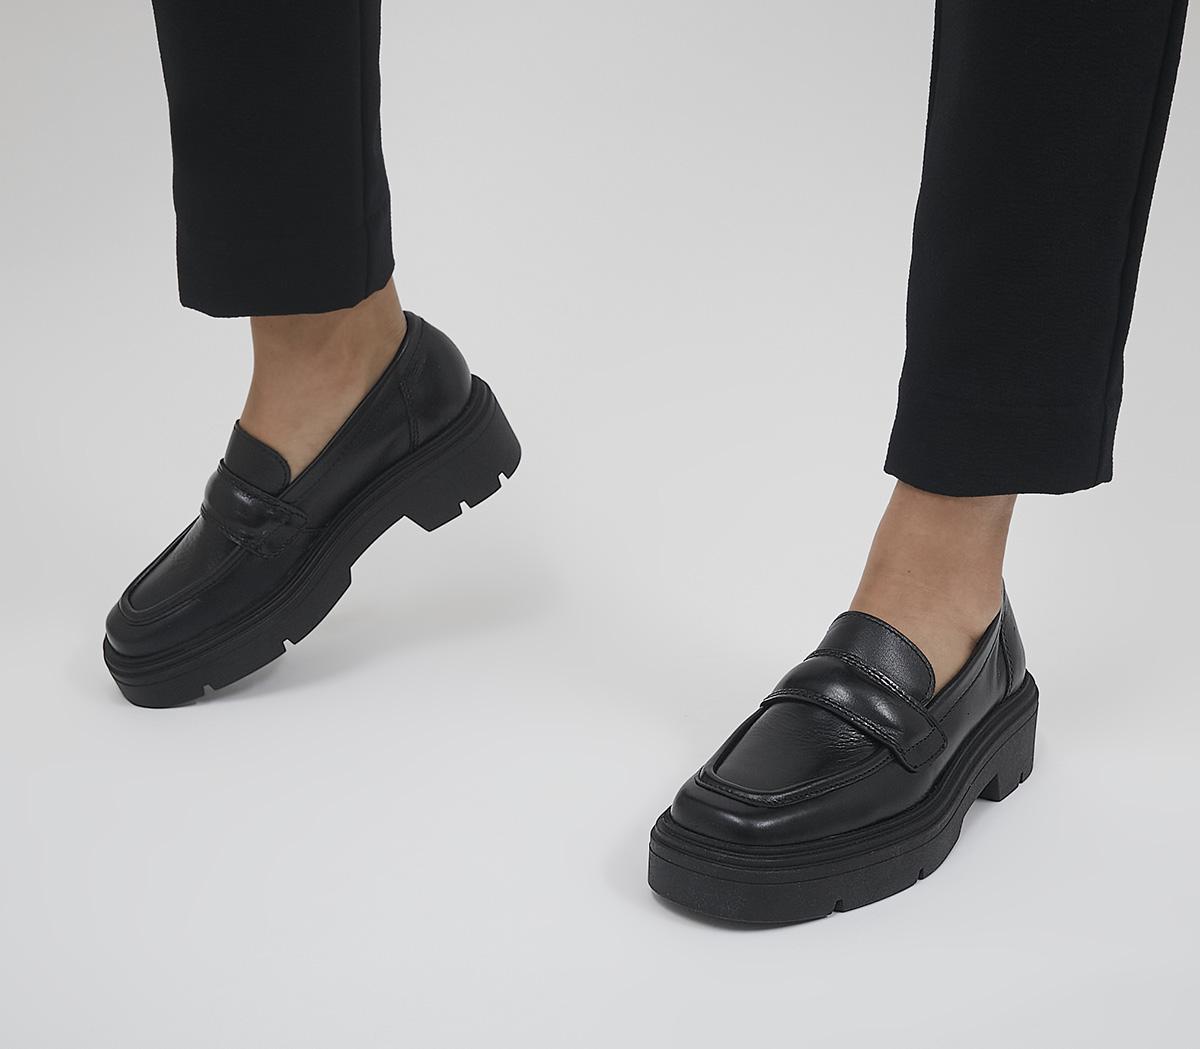 OFFICE Farnham Chunky Loafers Black Leather - OFFICE Girl